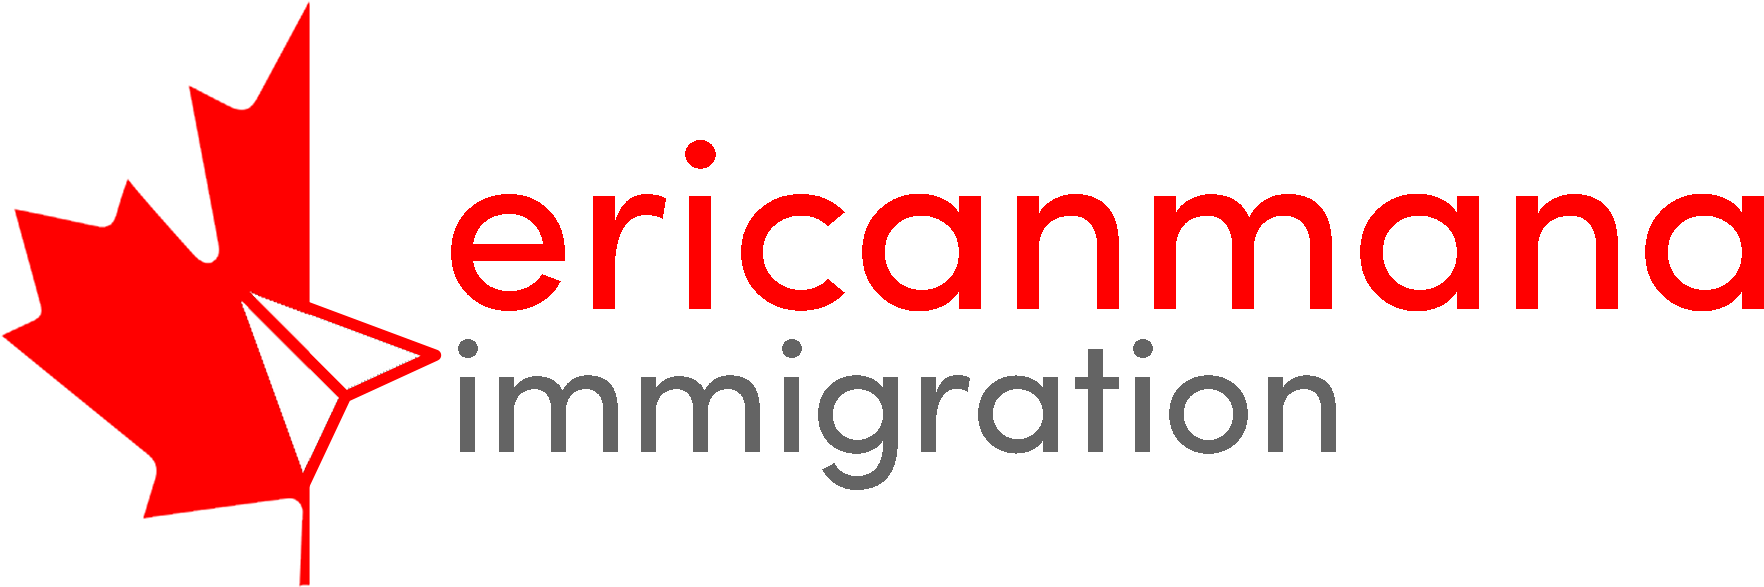 Ericanmana Immigration - Canada (1780x597), Png Download